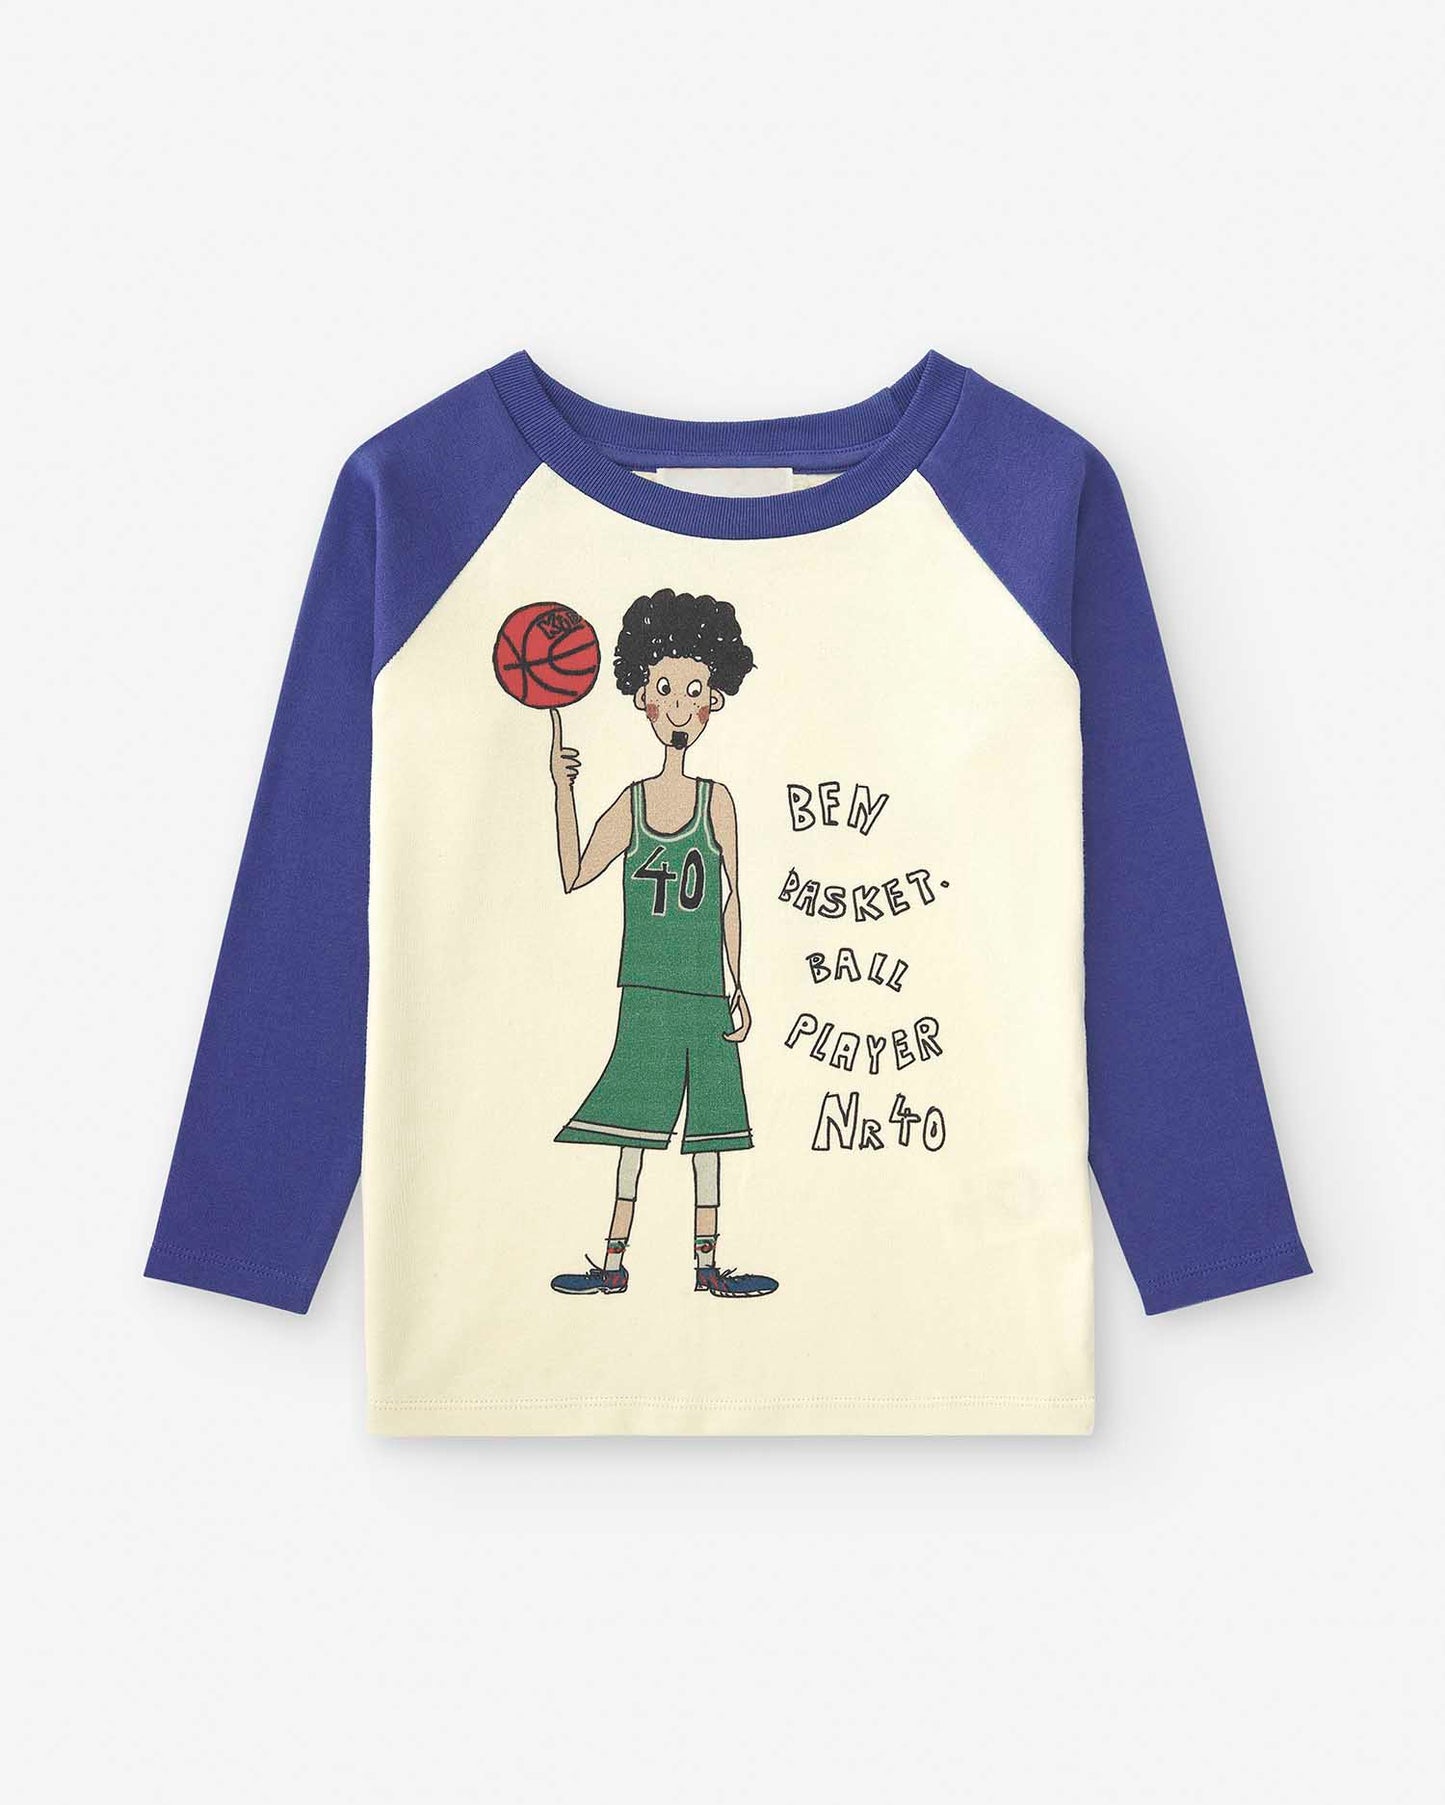 T-SHIRT WILL, THE BASKETBALL PLAYER